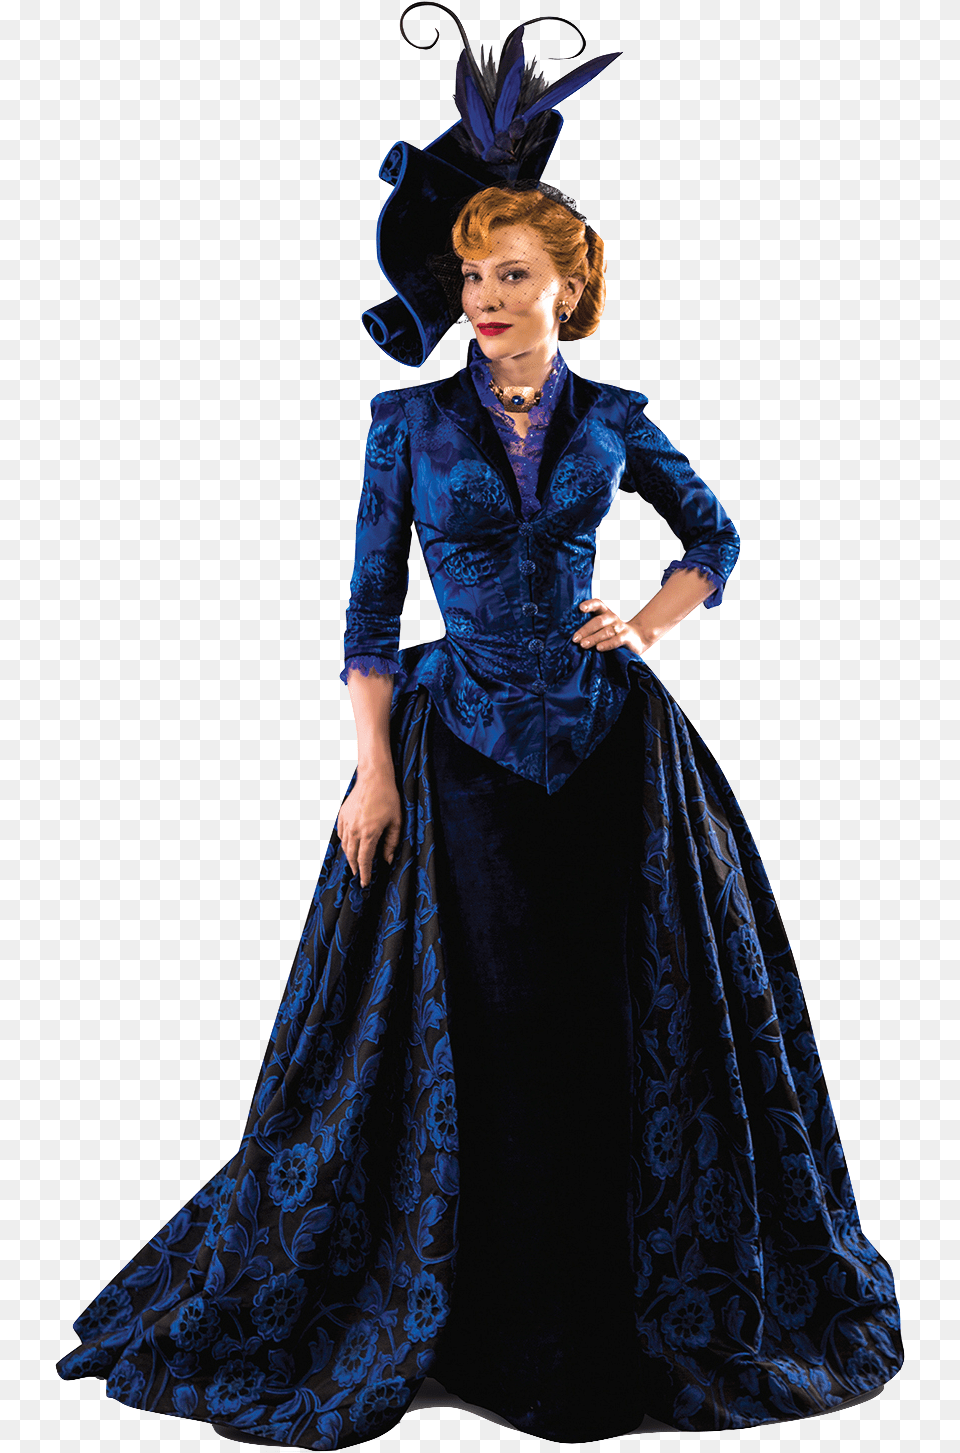 Cate Blanchett As Lady Tremaine By Nickelbackloverxoxox Lady Tremaine Cate Blanchett Cinderella, Formal Wear, Clothing, Costume, Dress Png